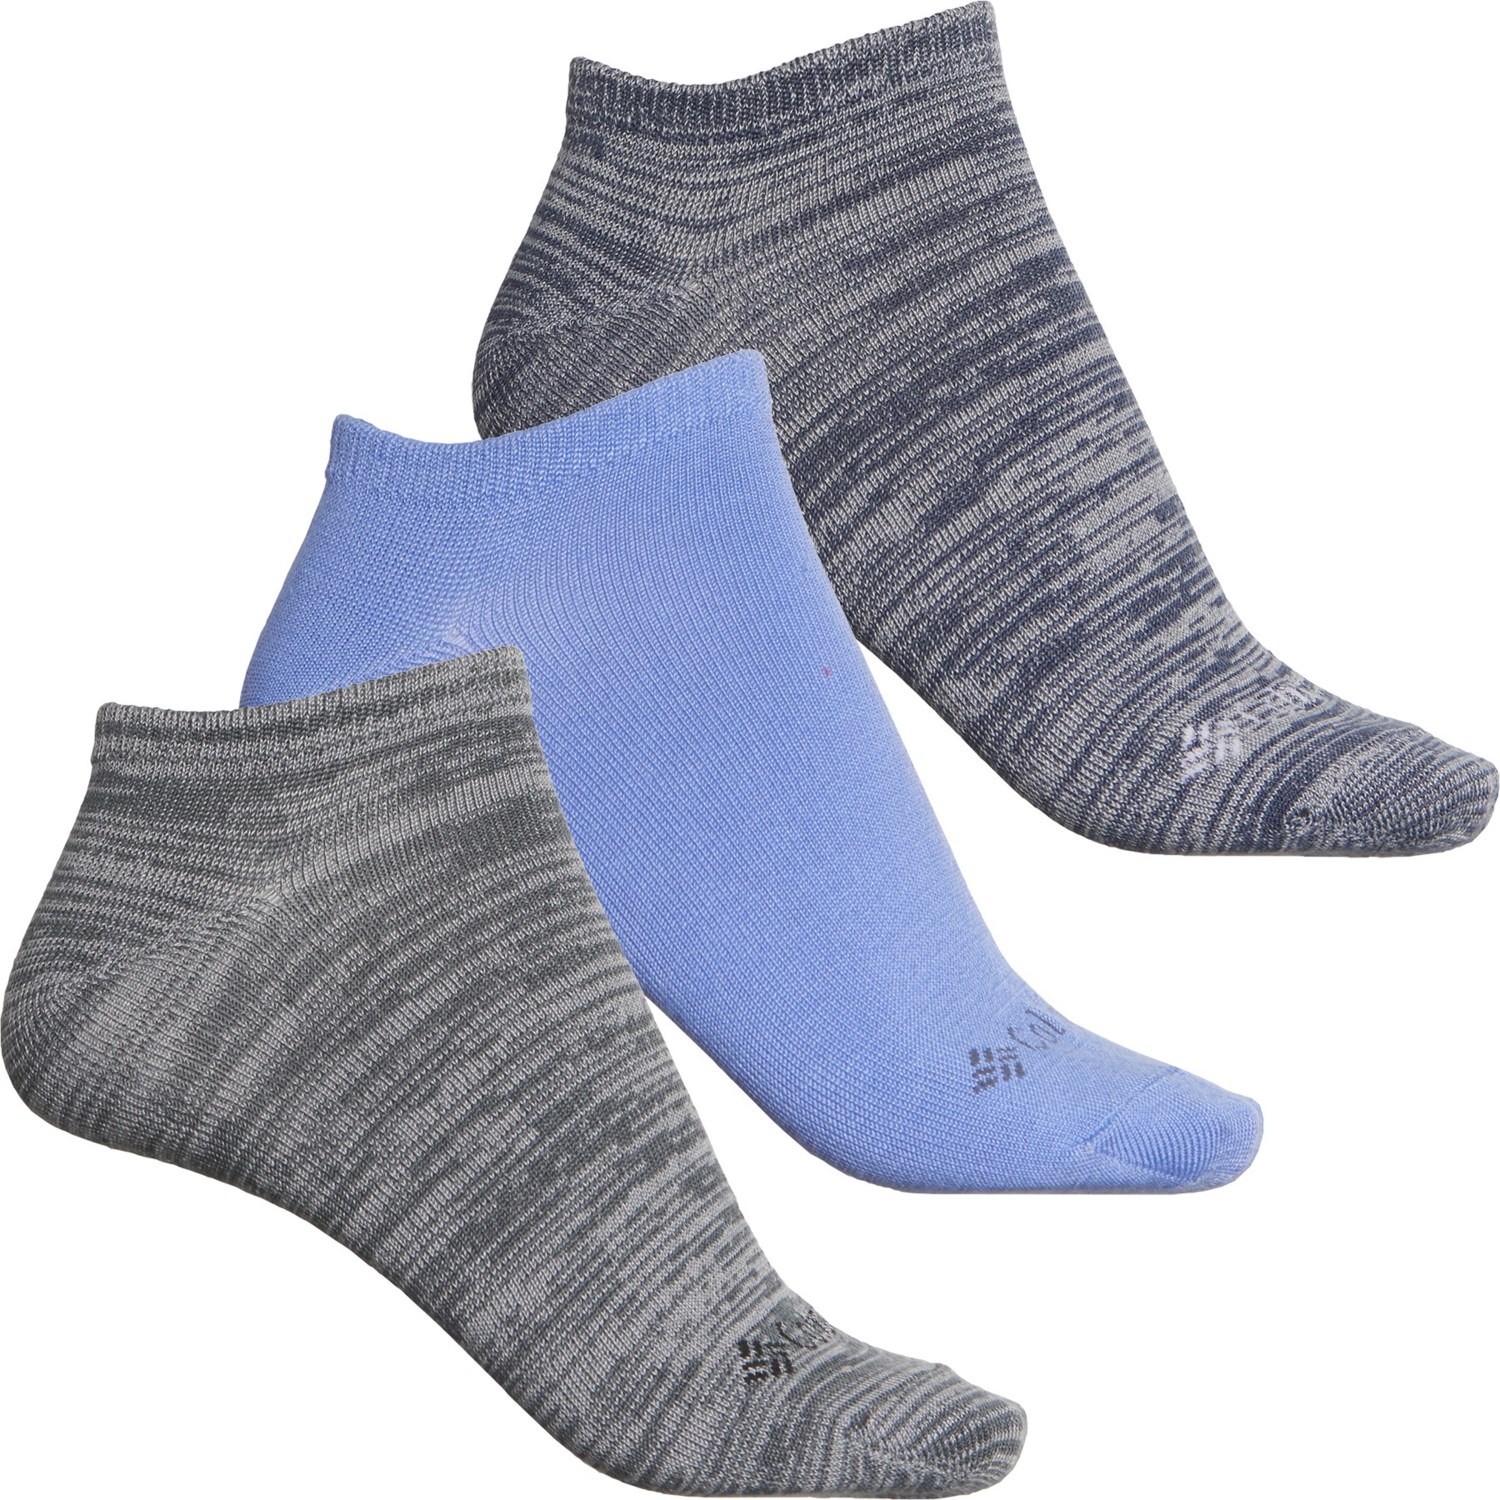 COLUMBIA Basic No-Show Socks - 3-Pack, Below the Ankle (For Women)